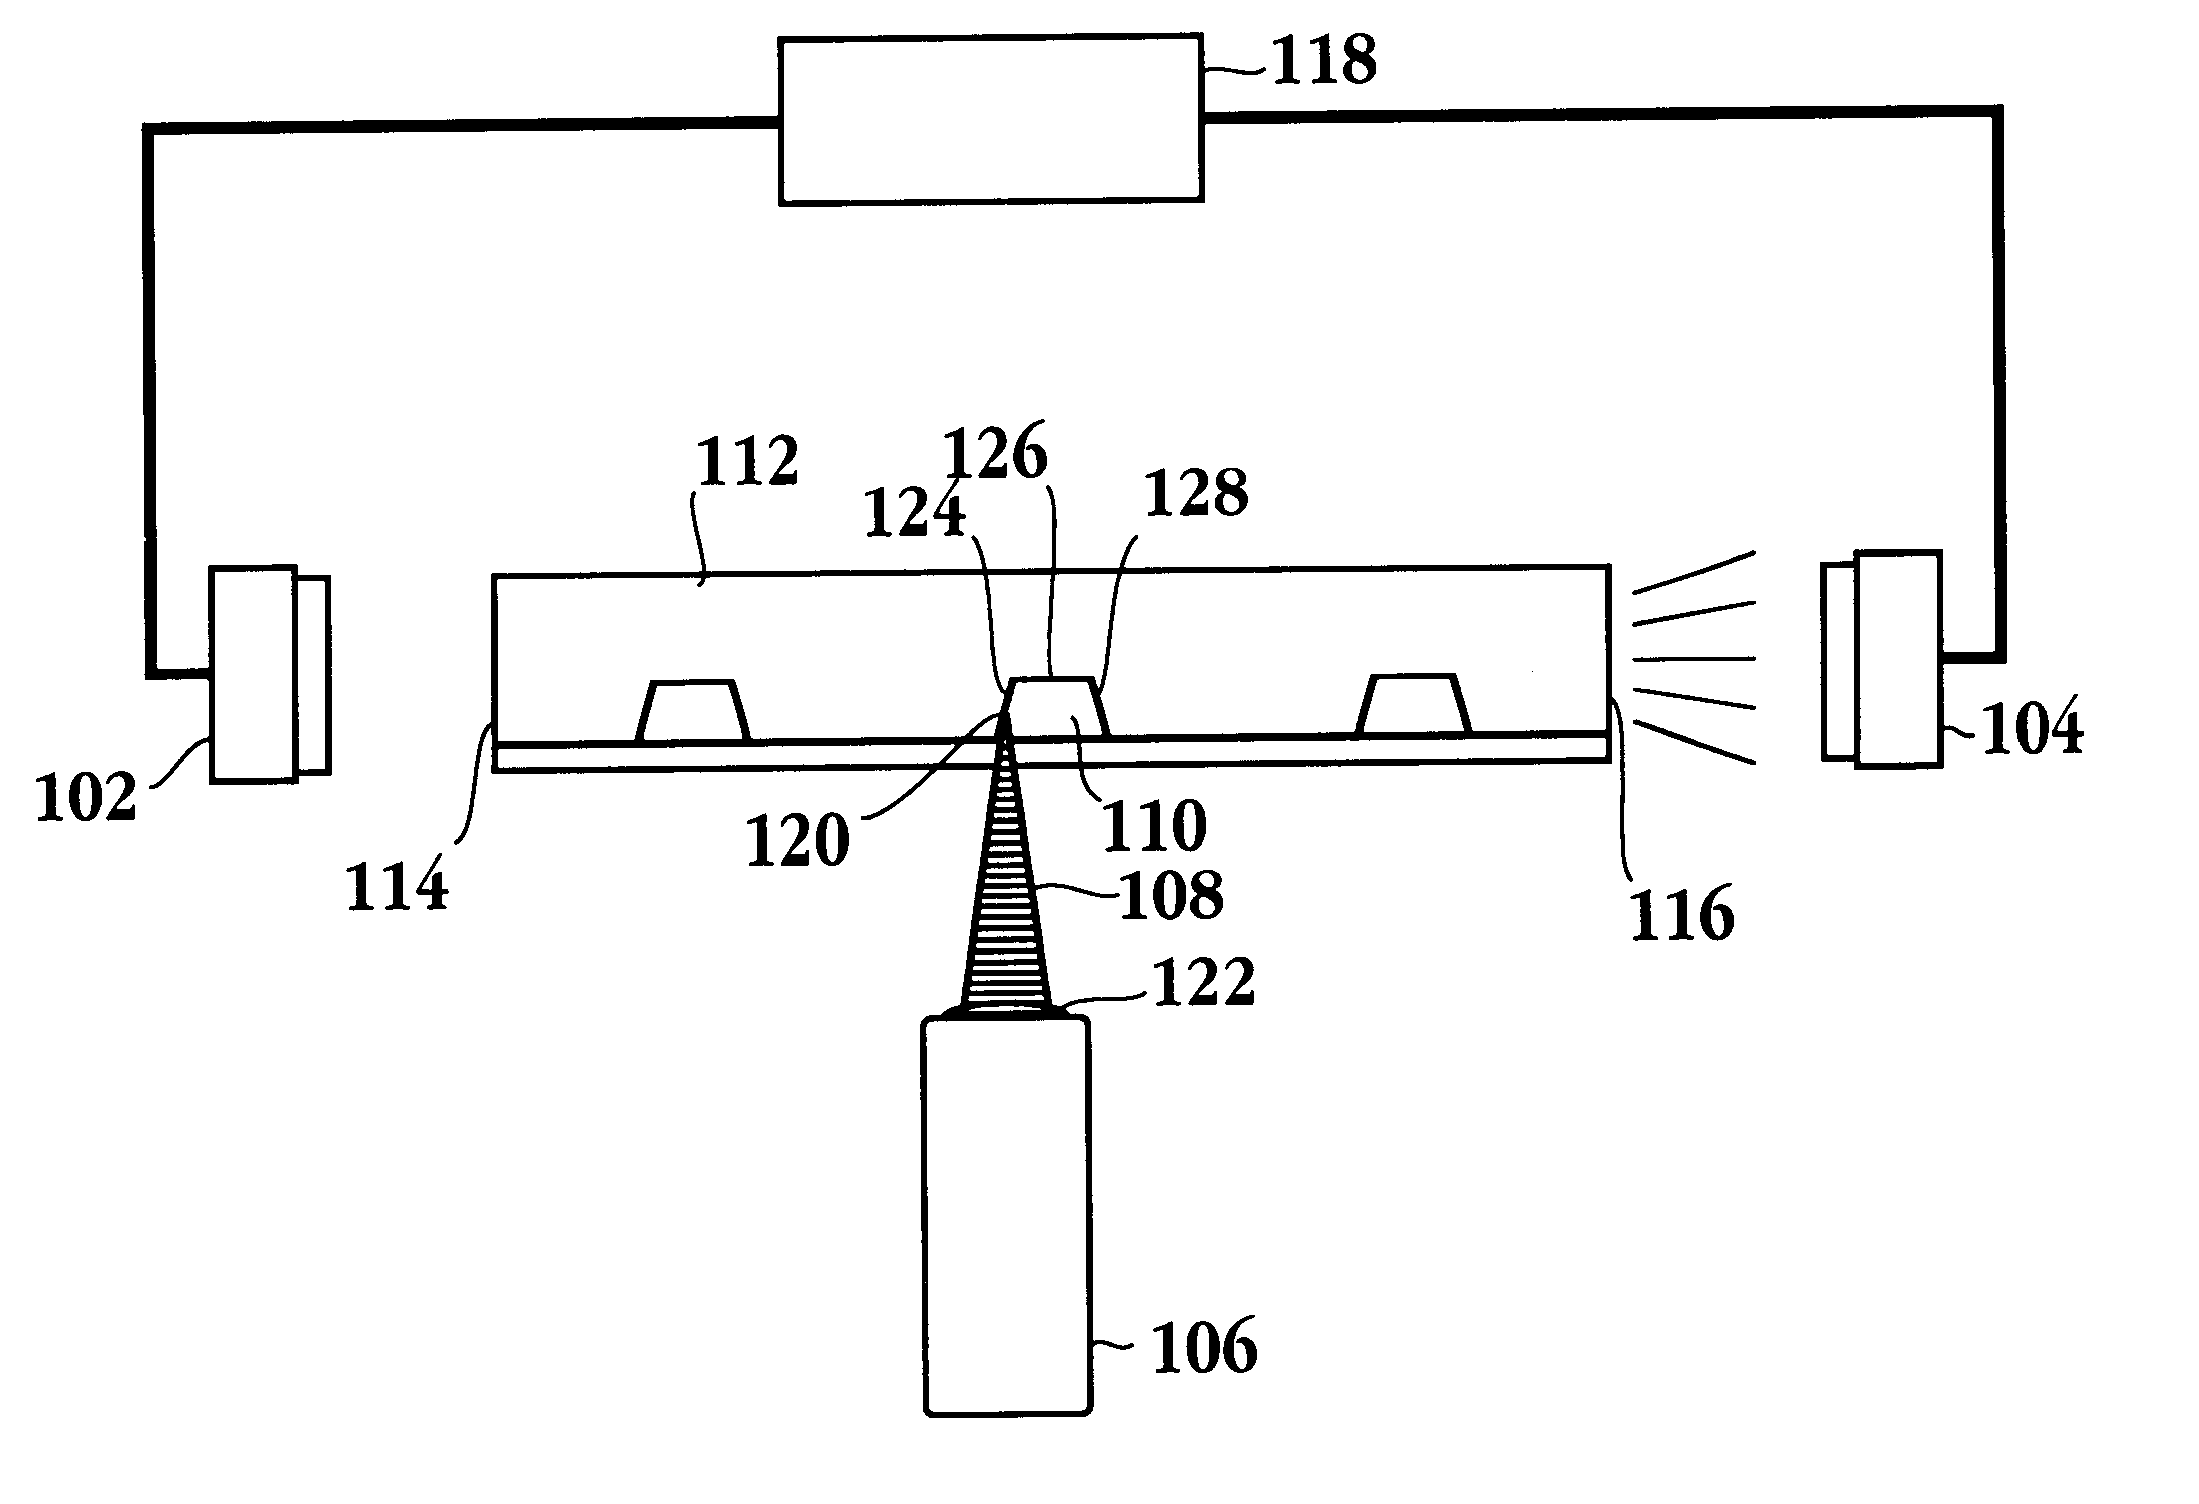 Optical alignment in capillary detection using capillary wall scatter